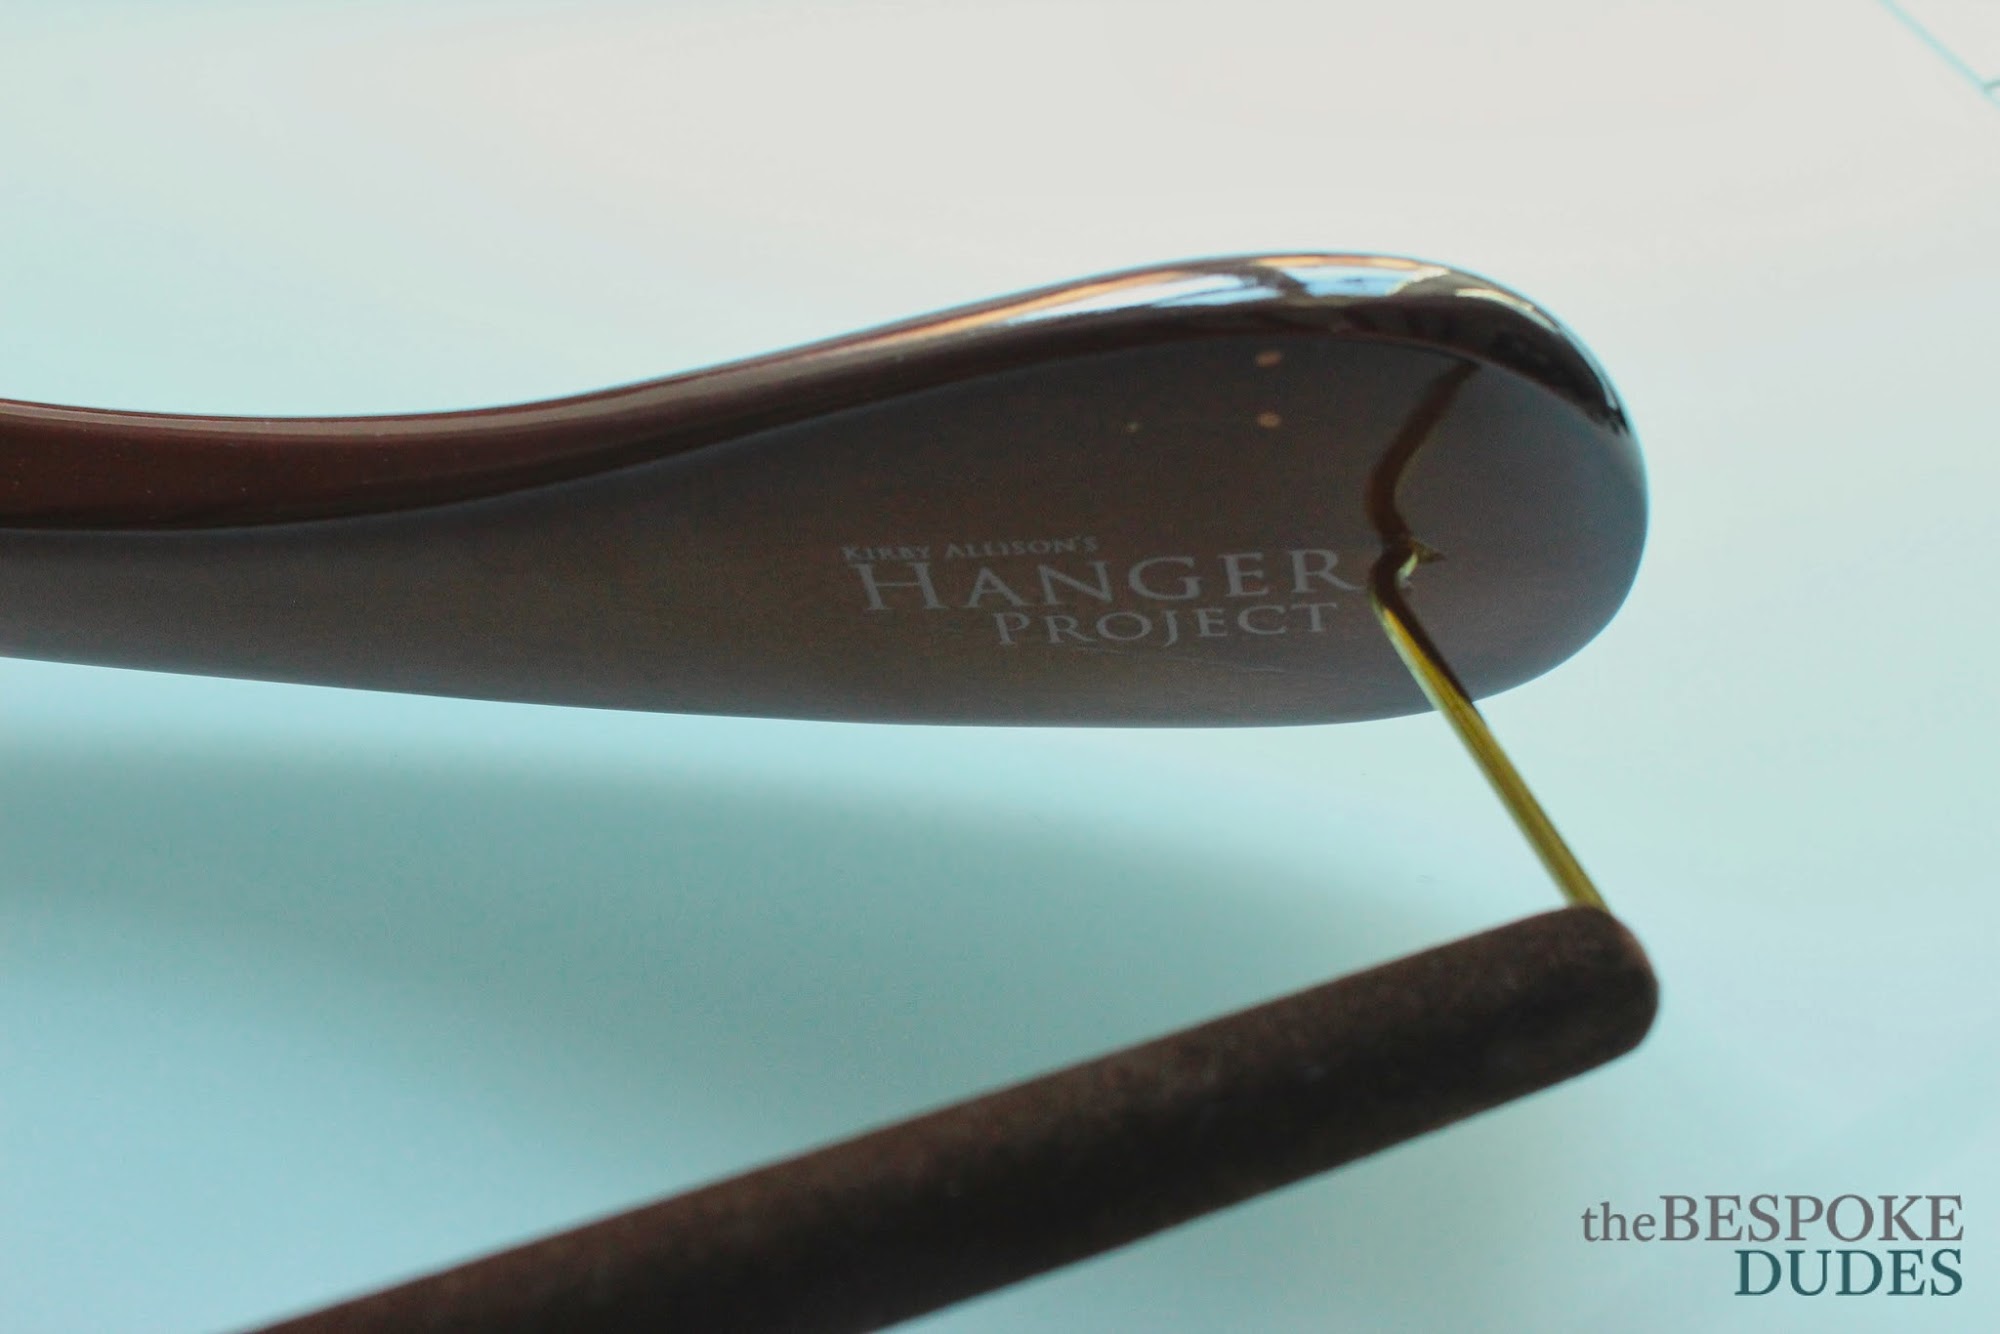 Suit care: The Hanger Project